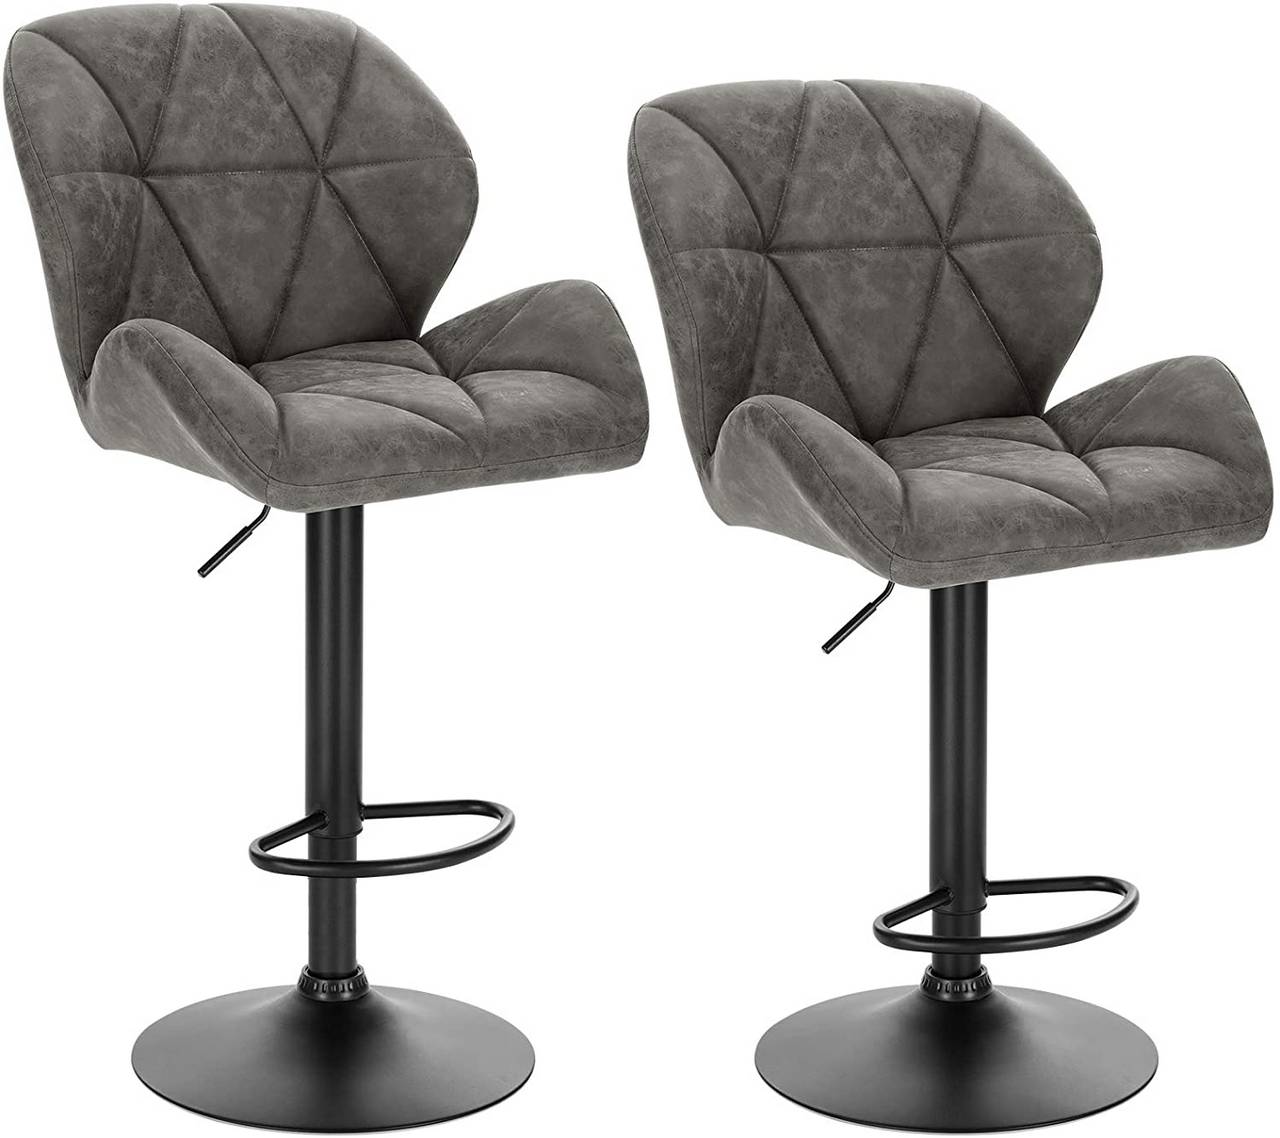 Set of 2 bar stools, leather made of imitation bistro backrest stools, counter with stools